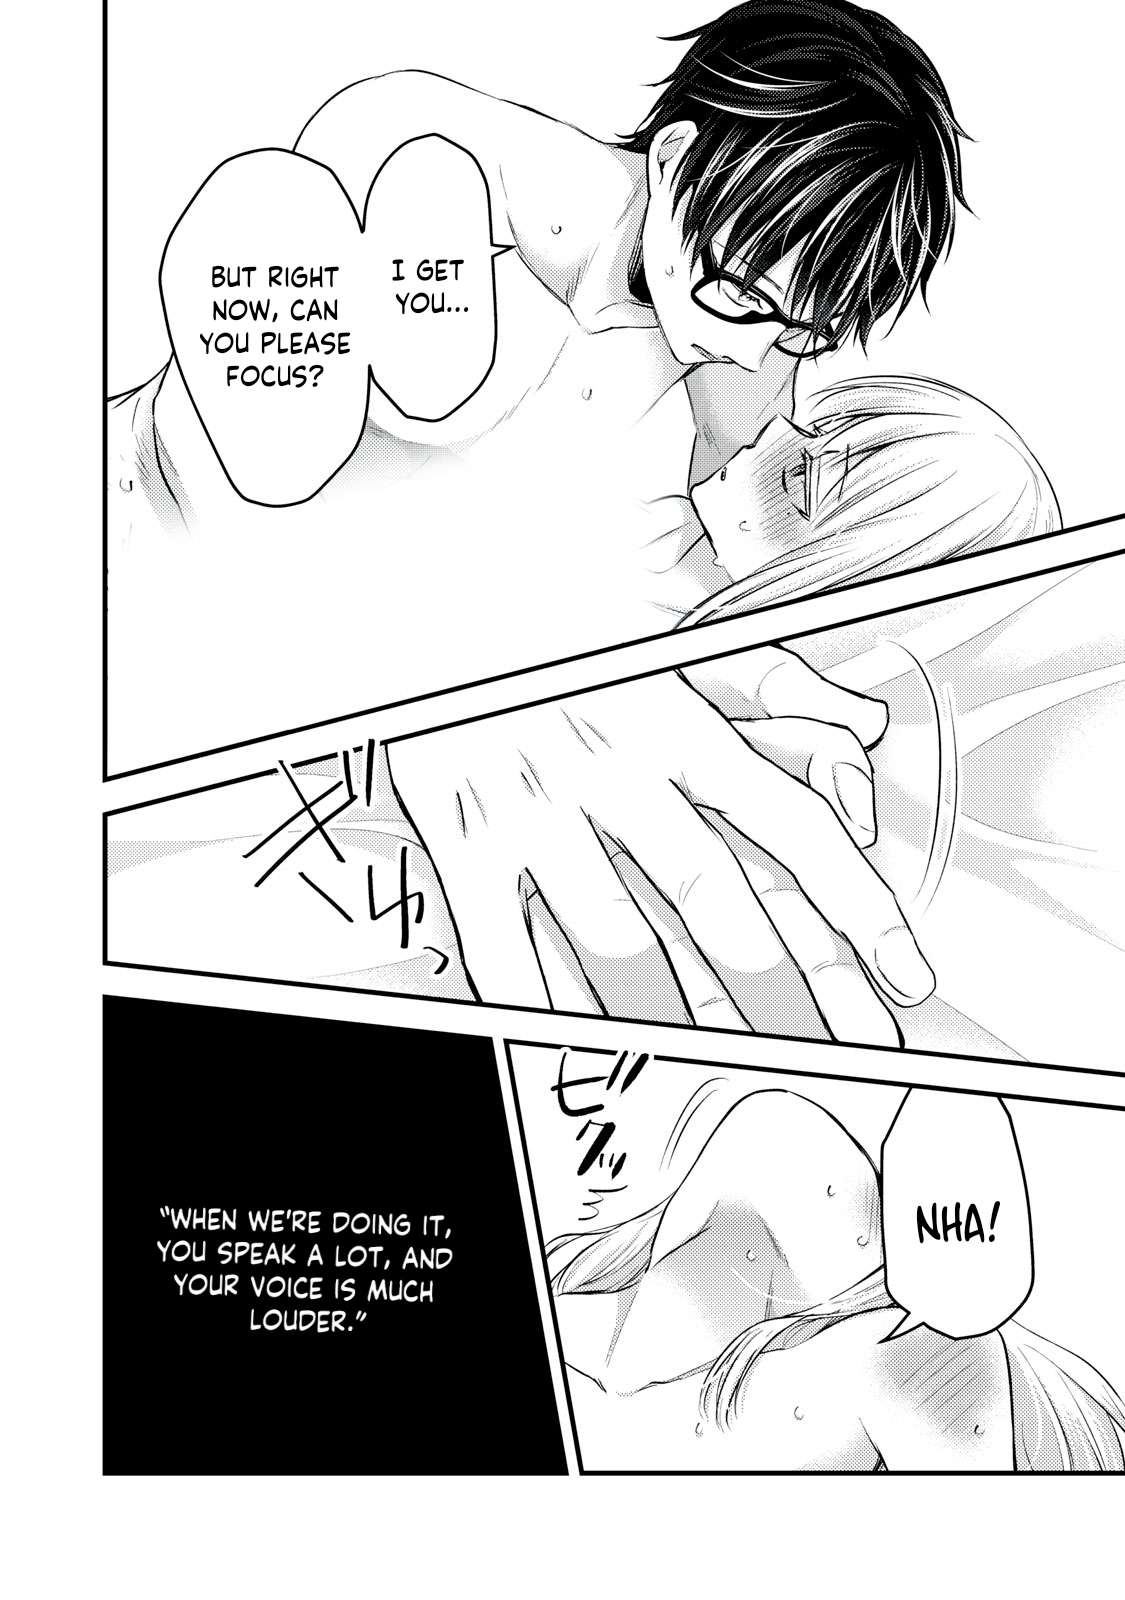 We May Be an Inexperienced Couple but... chapter 121 page 13